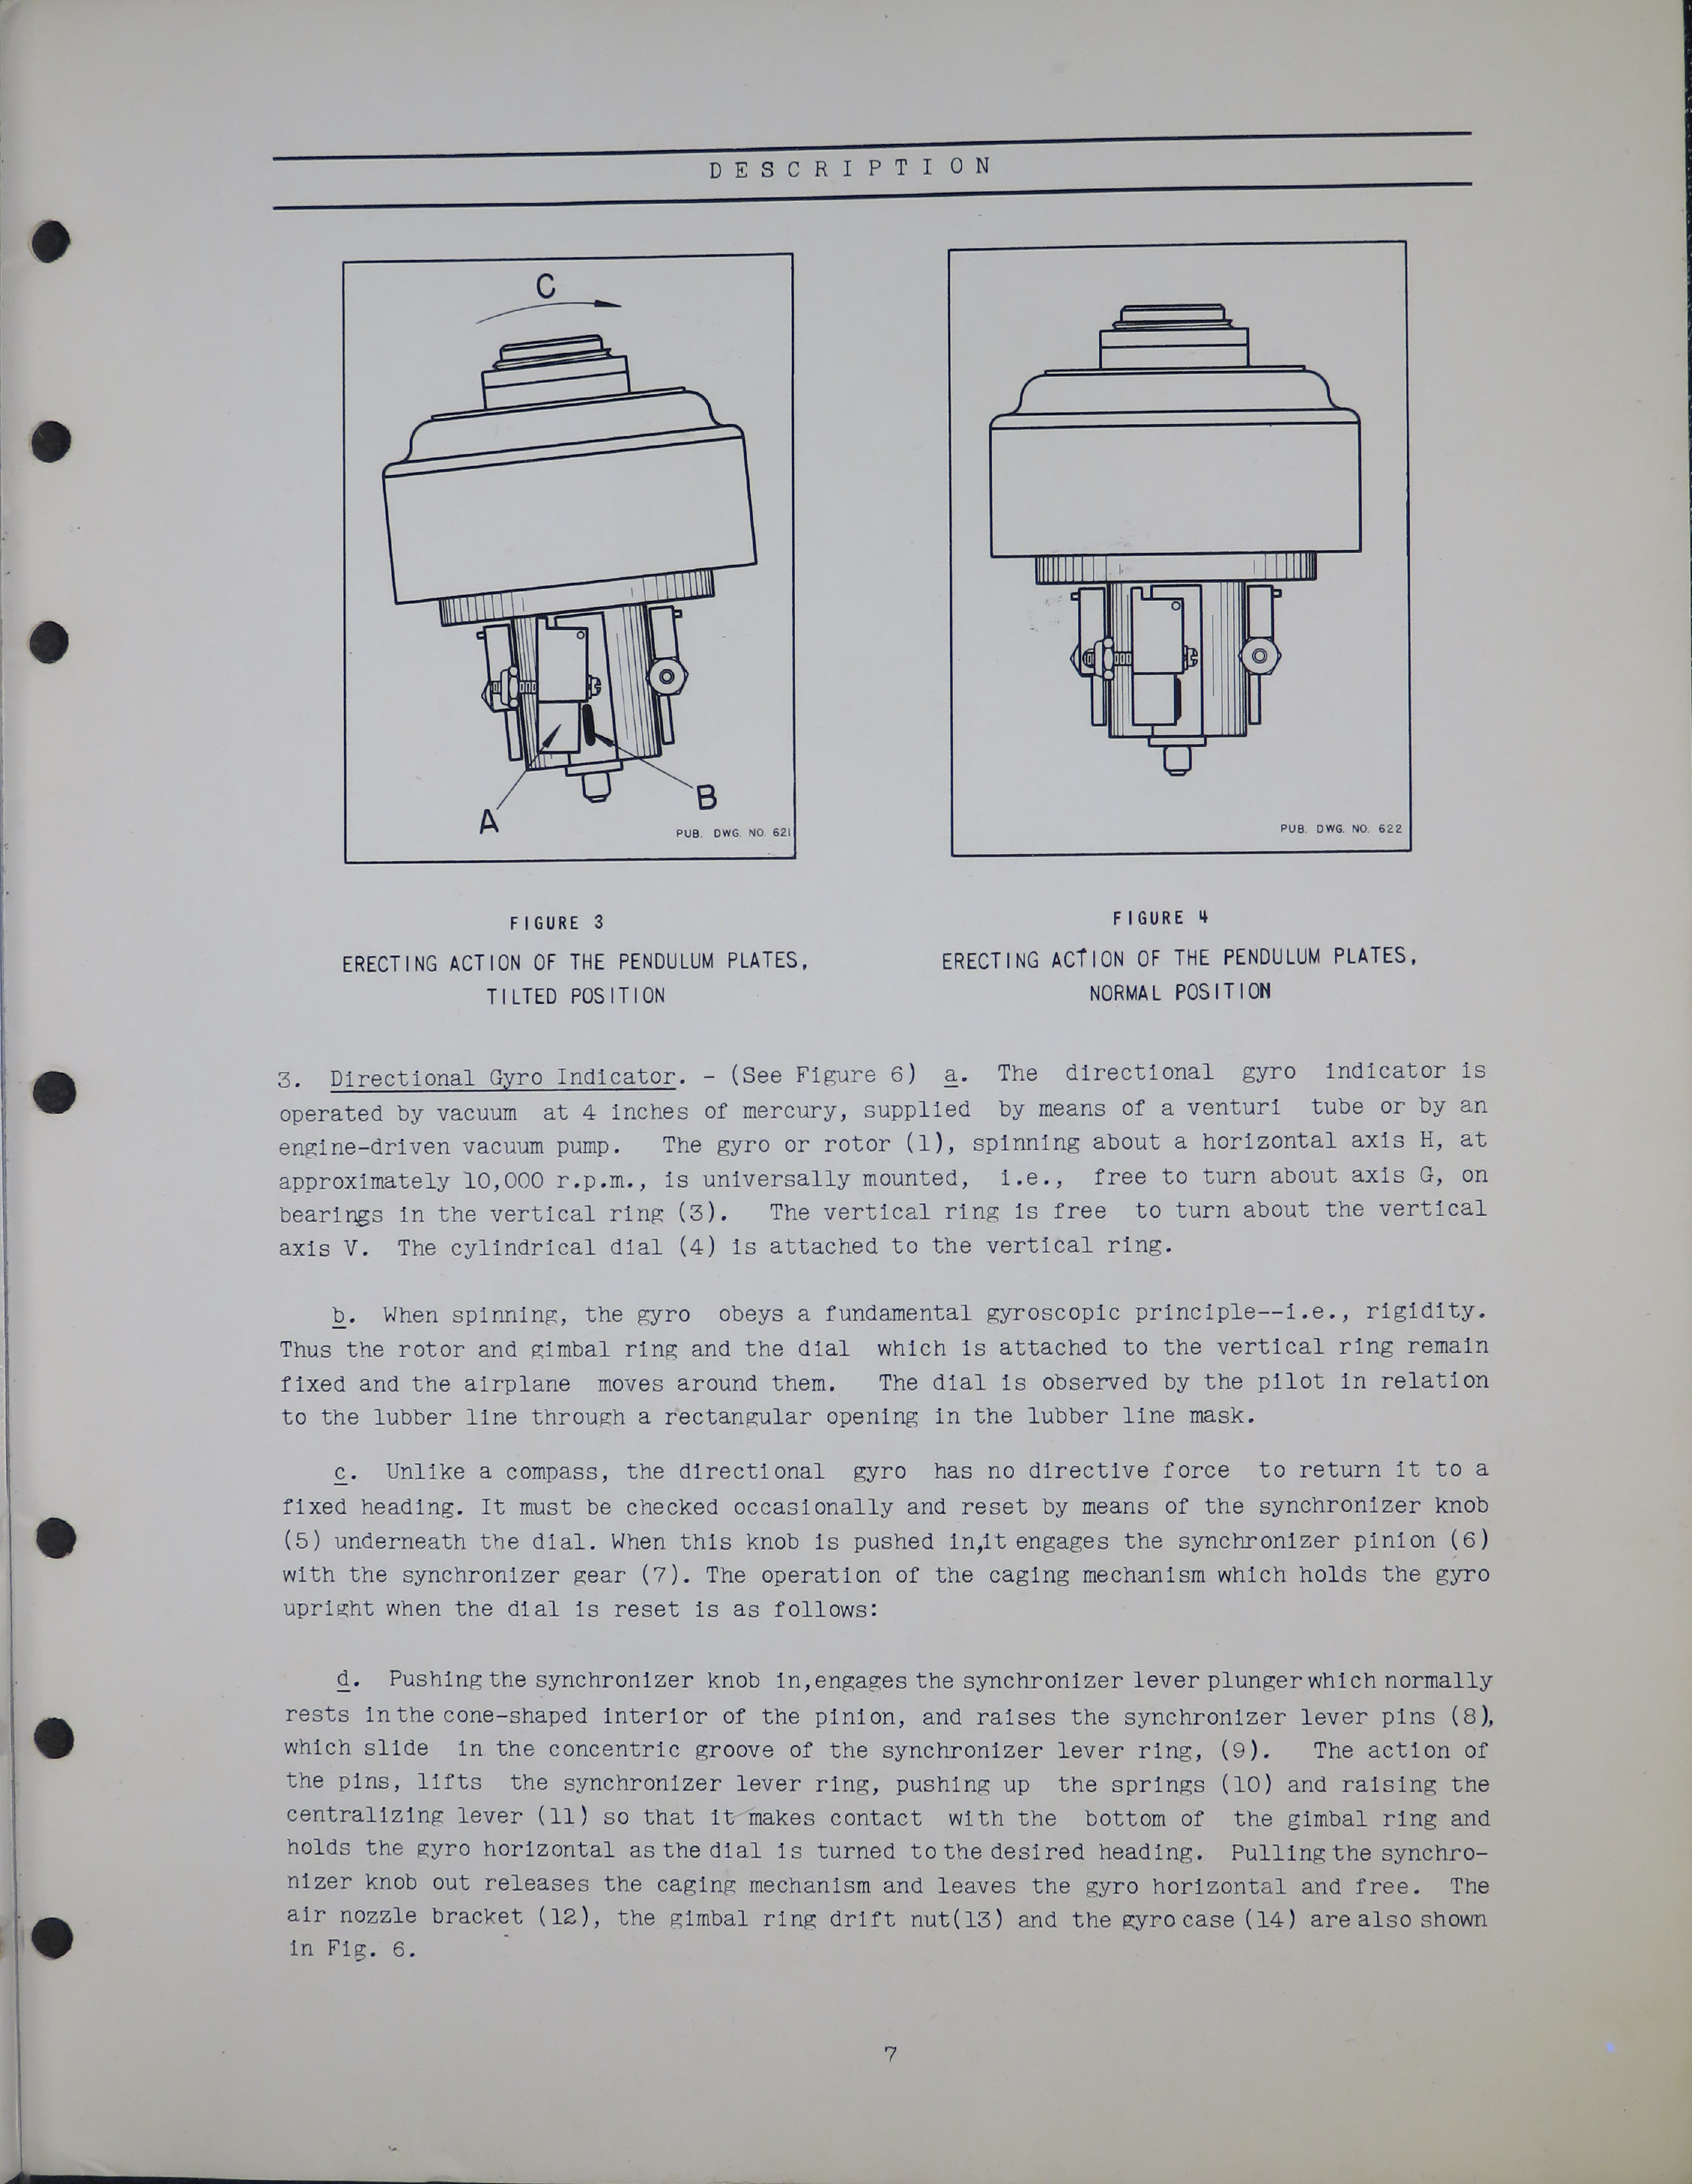 Sample page 7 from AirCorps Library document: Gyro-Horizon Indicator and Directional Gyro Indicator